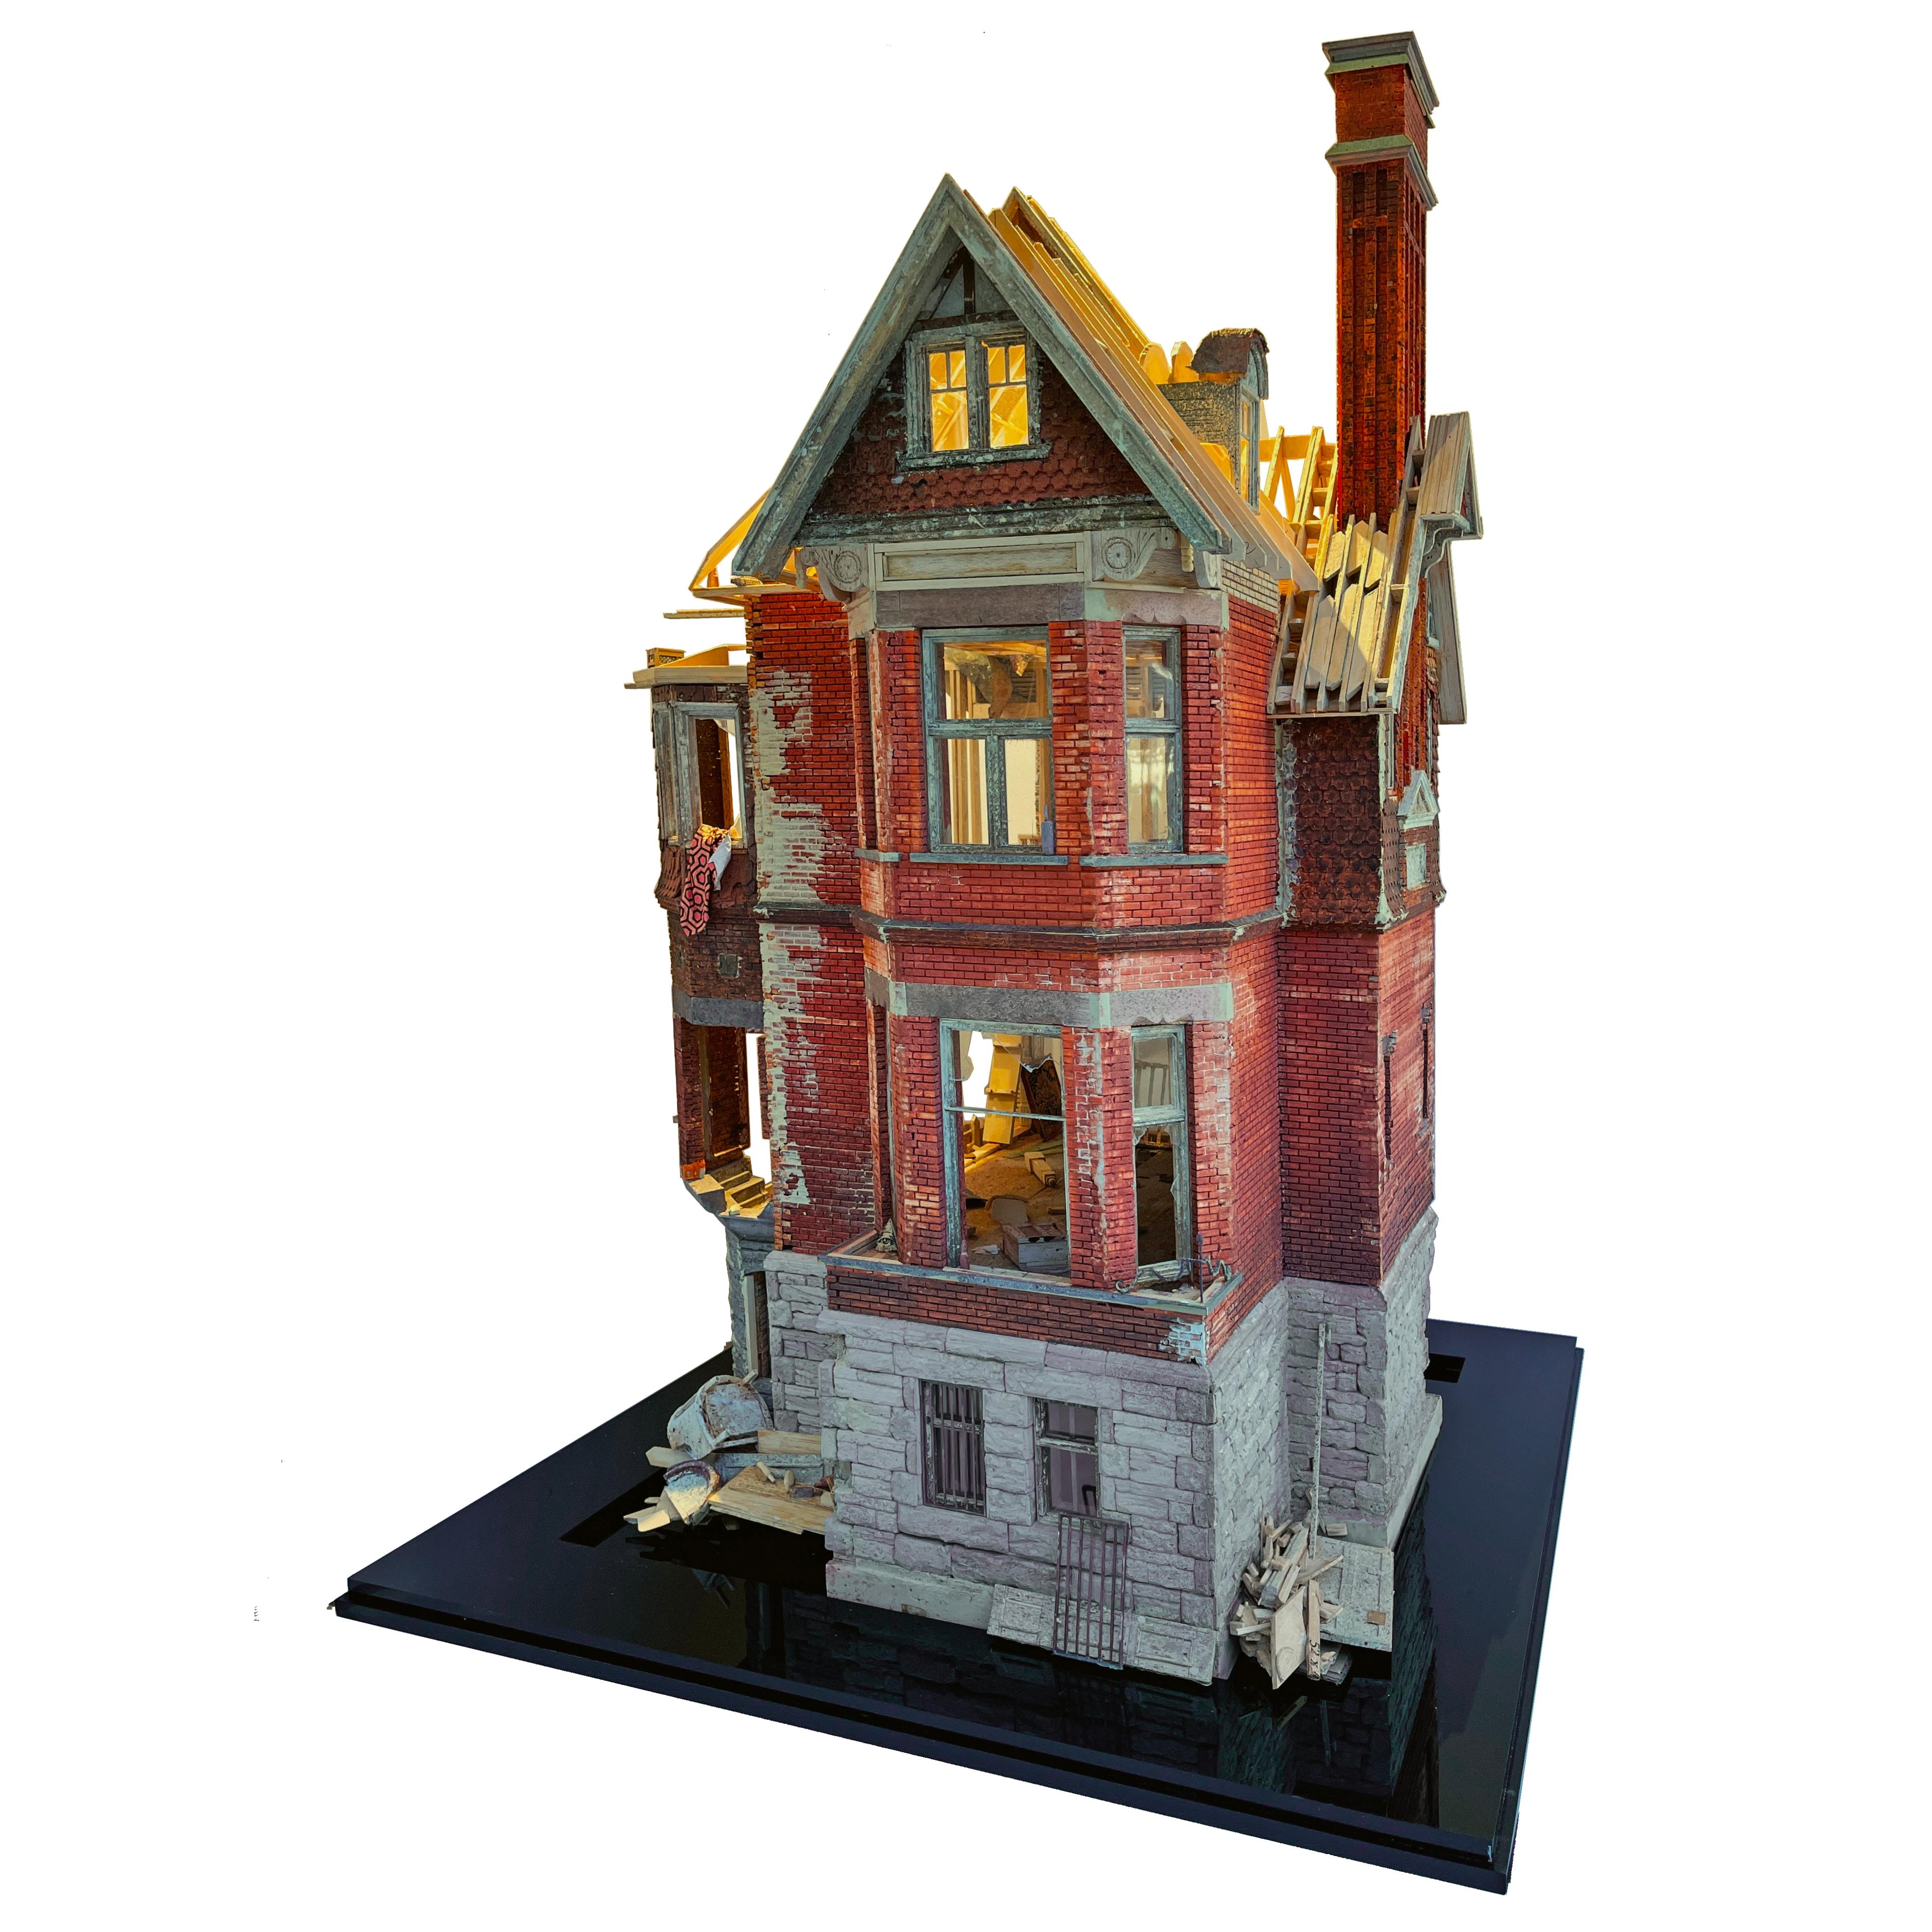 The Redpath Mansion - Highly Detailed Scale Model Sculpture, Crumbling Building